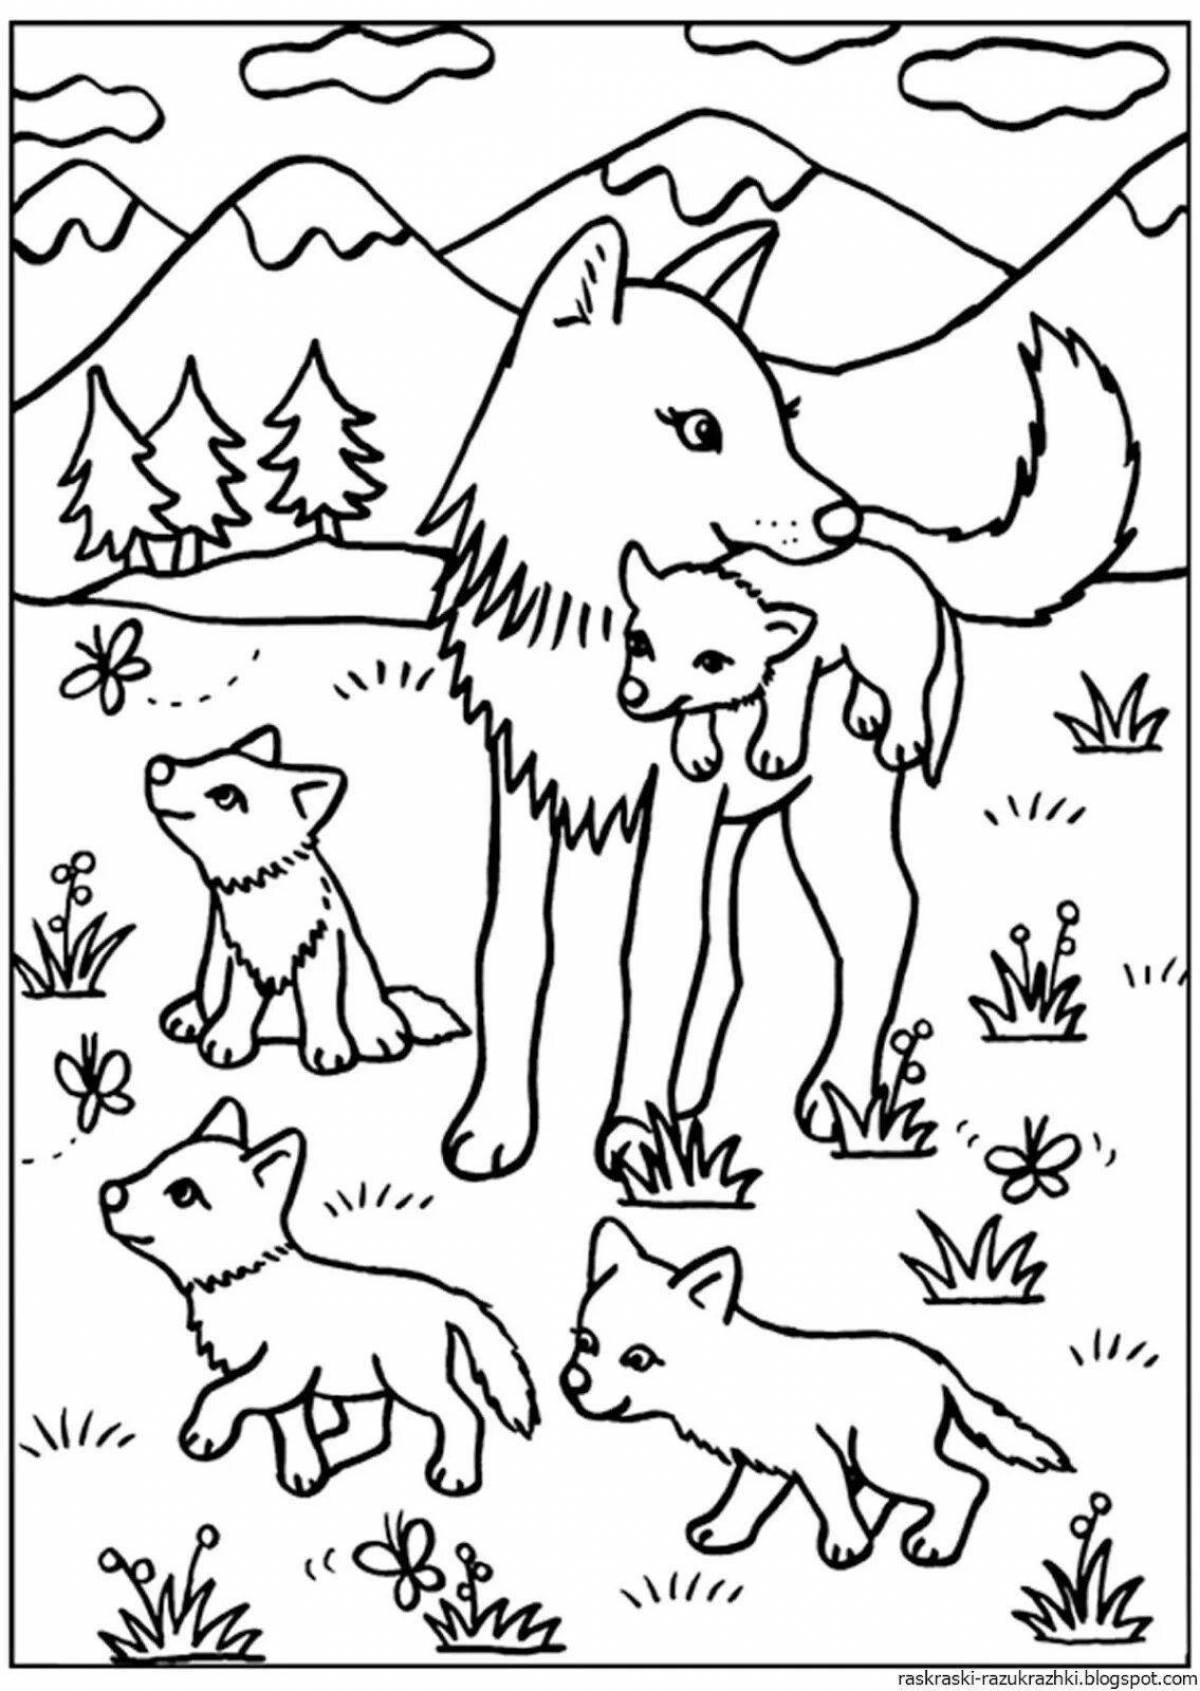 Fun coloring pages of wild animals for kids